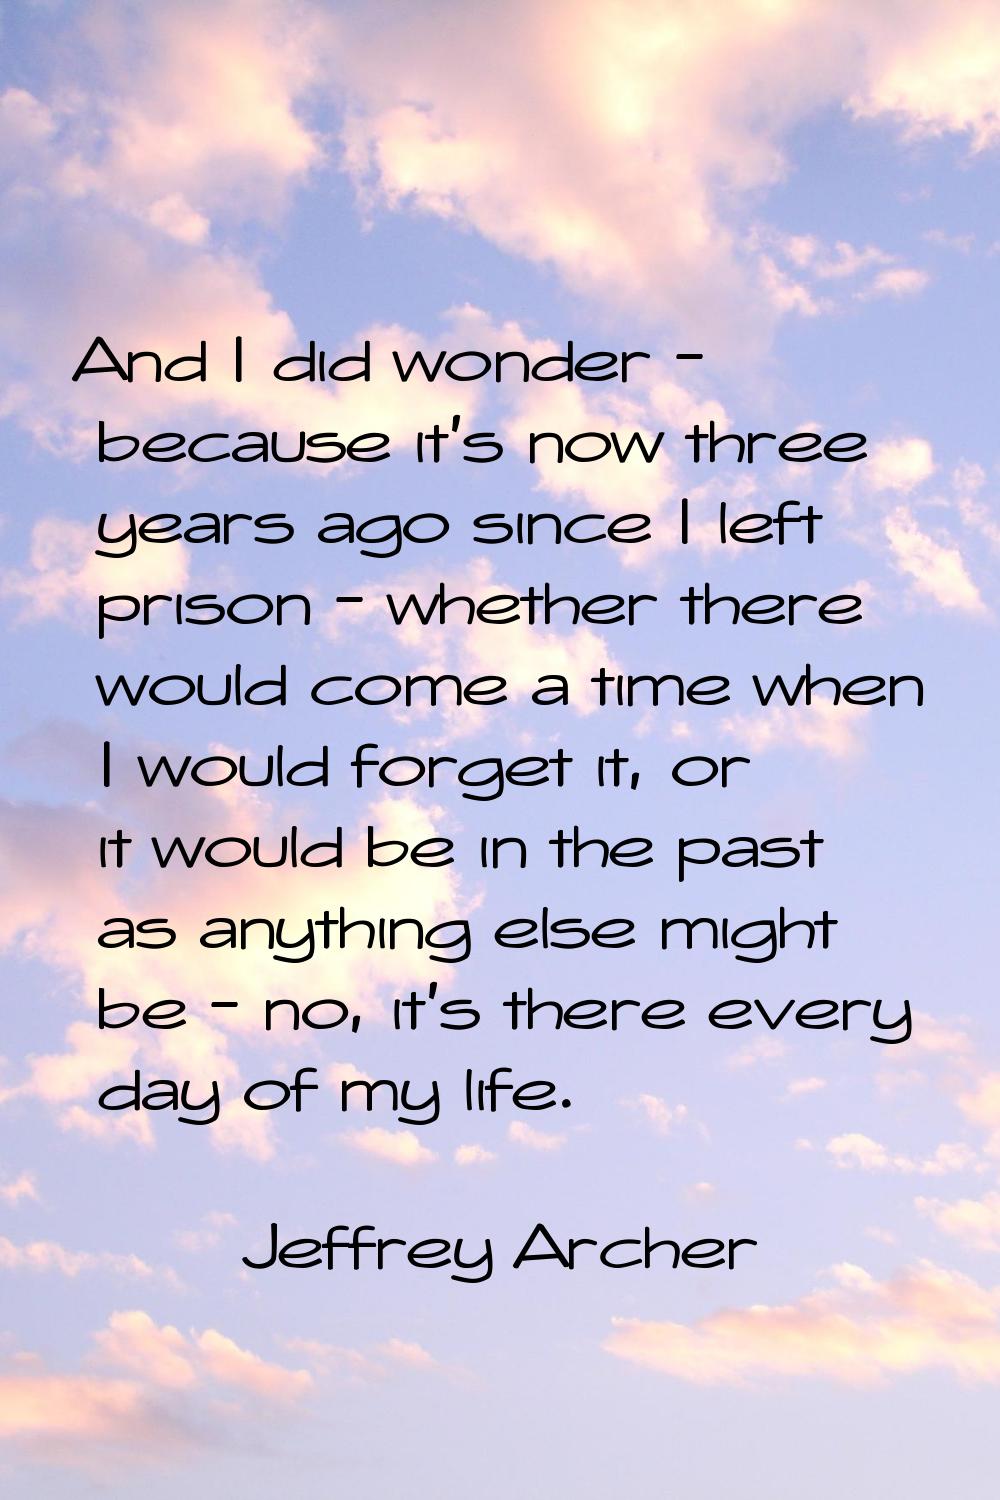 And I did wonder - because it's now three years ago since I left prison - whether there would come 